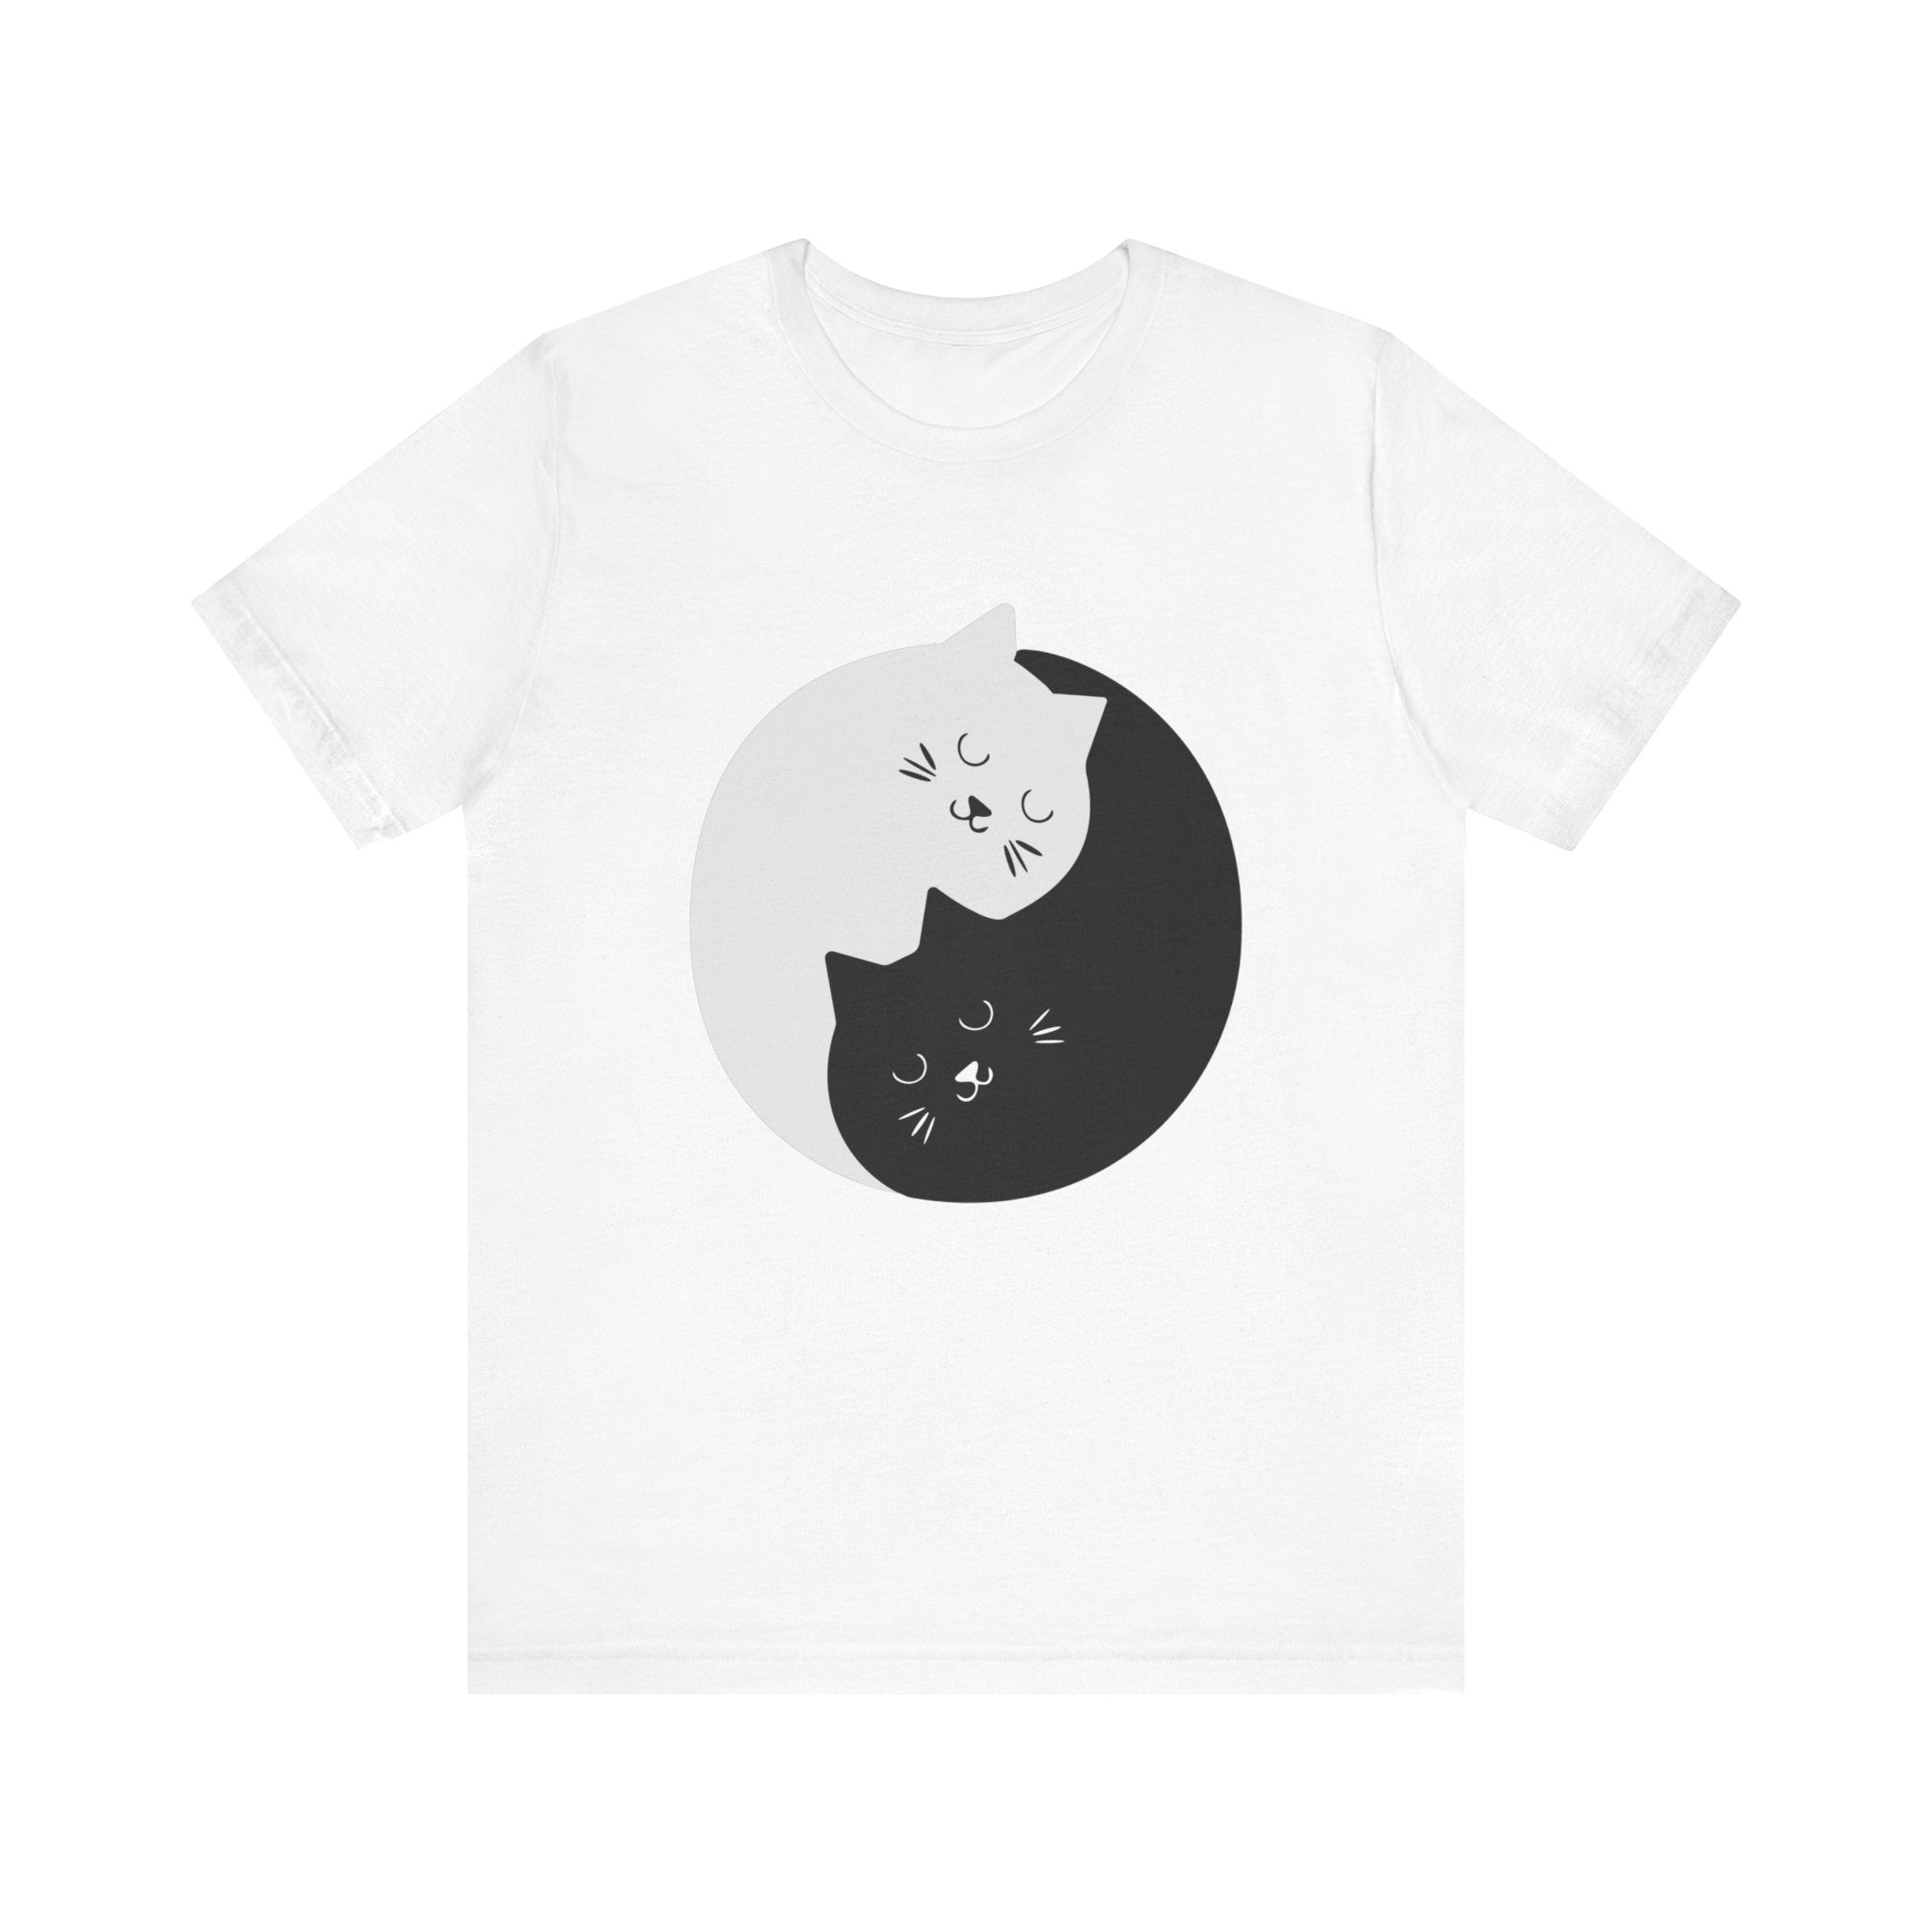 YING- ANG KITTIES T-shirt featuring a Ying & Yang symbol designed with two kitties, one black and one white, nestled together.